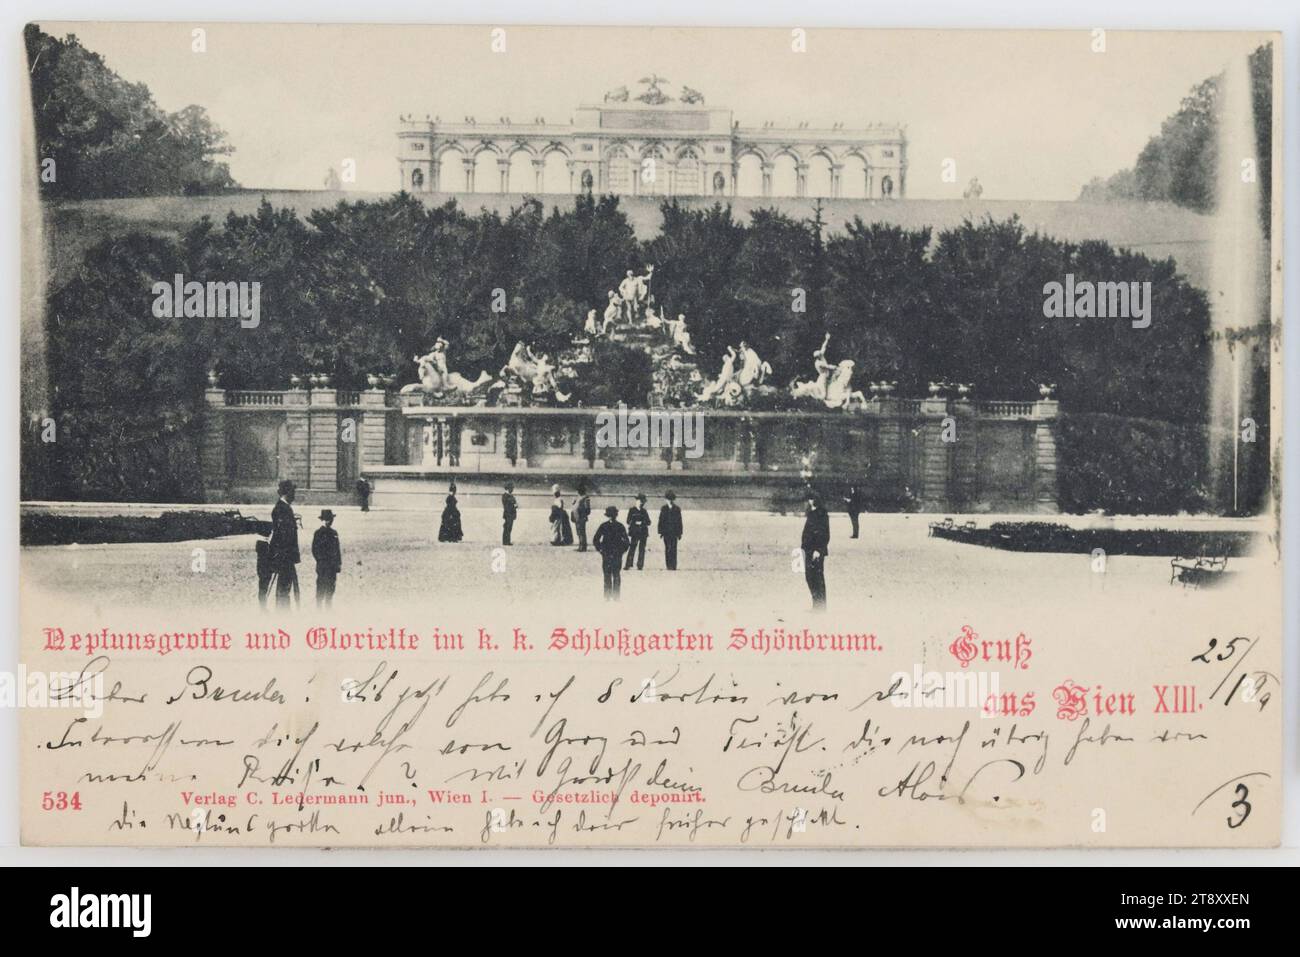 13th, Schönbrunn - Gloriette, from the palace park, with Neptune fountain, picture postcard, Carl (Karl) Ledermann jun., Producer, 1899, paperboard, Collotype, Inscription, FROM, Vienna, TO, Brno, ADDRESS, To Wolgeboren, Herr, Bäckermeister, in Brno, Franziskanergasse 9, MESSAGE, 25, I 99, Dear brother! So far I have 8 cards from you. Are you interested in some from Graz and Trieste. I sent you the Neptune Grotto alone earlier, Attractions, Habsburgs, Park, Recreation and Leisure, Media and Communication, Postcards with transliteration, 13th District: Hietzing, public gardens, park Stock Photo